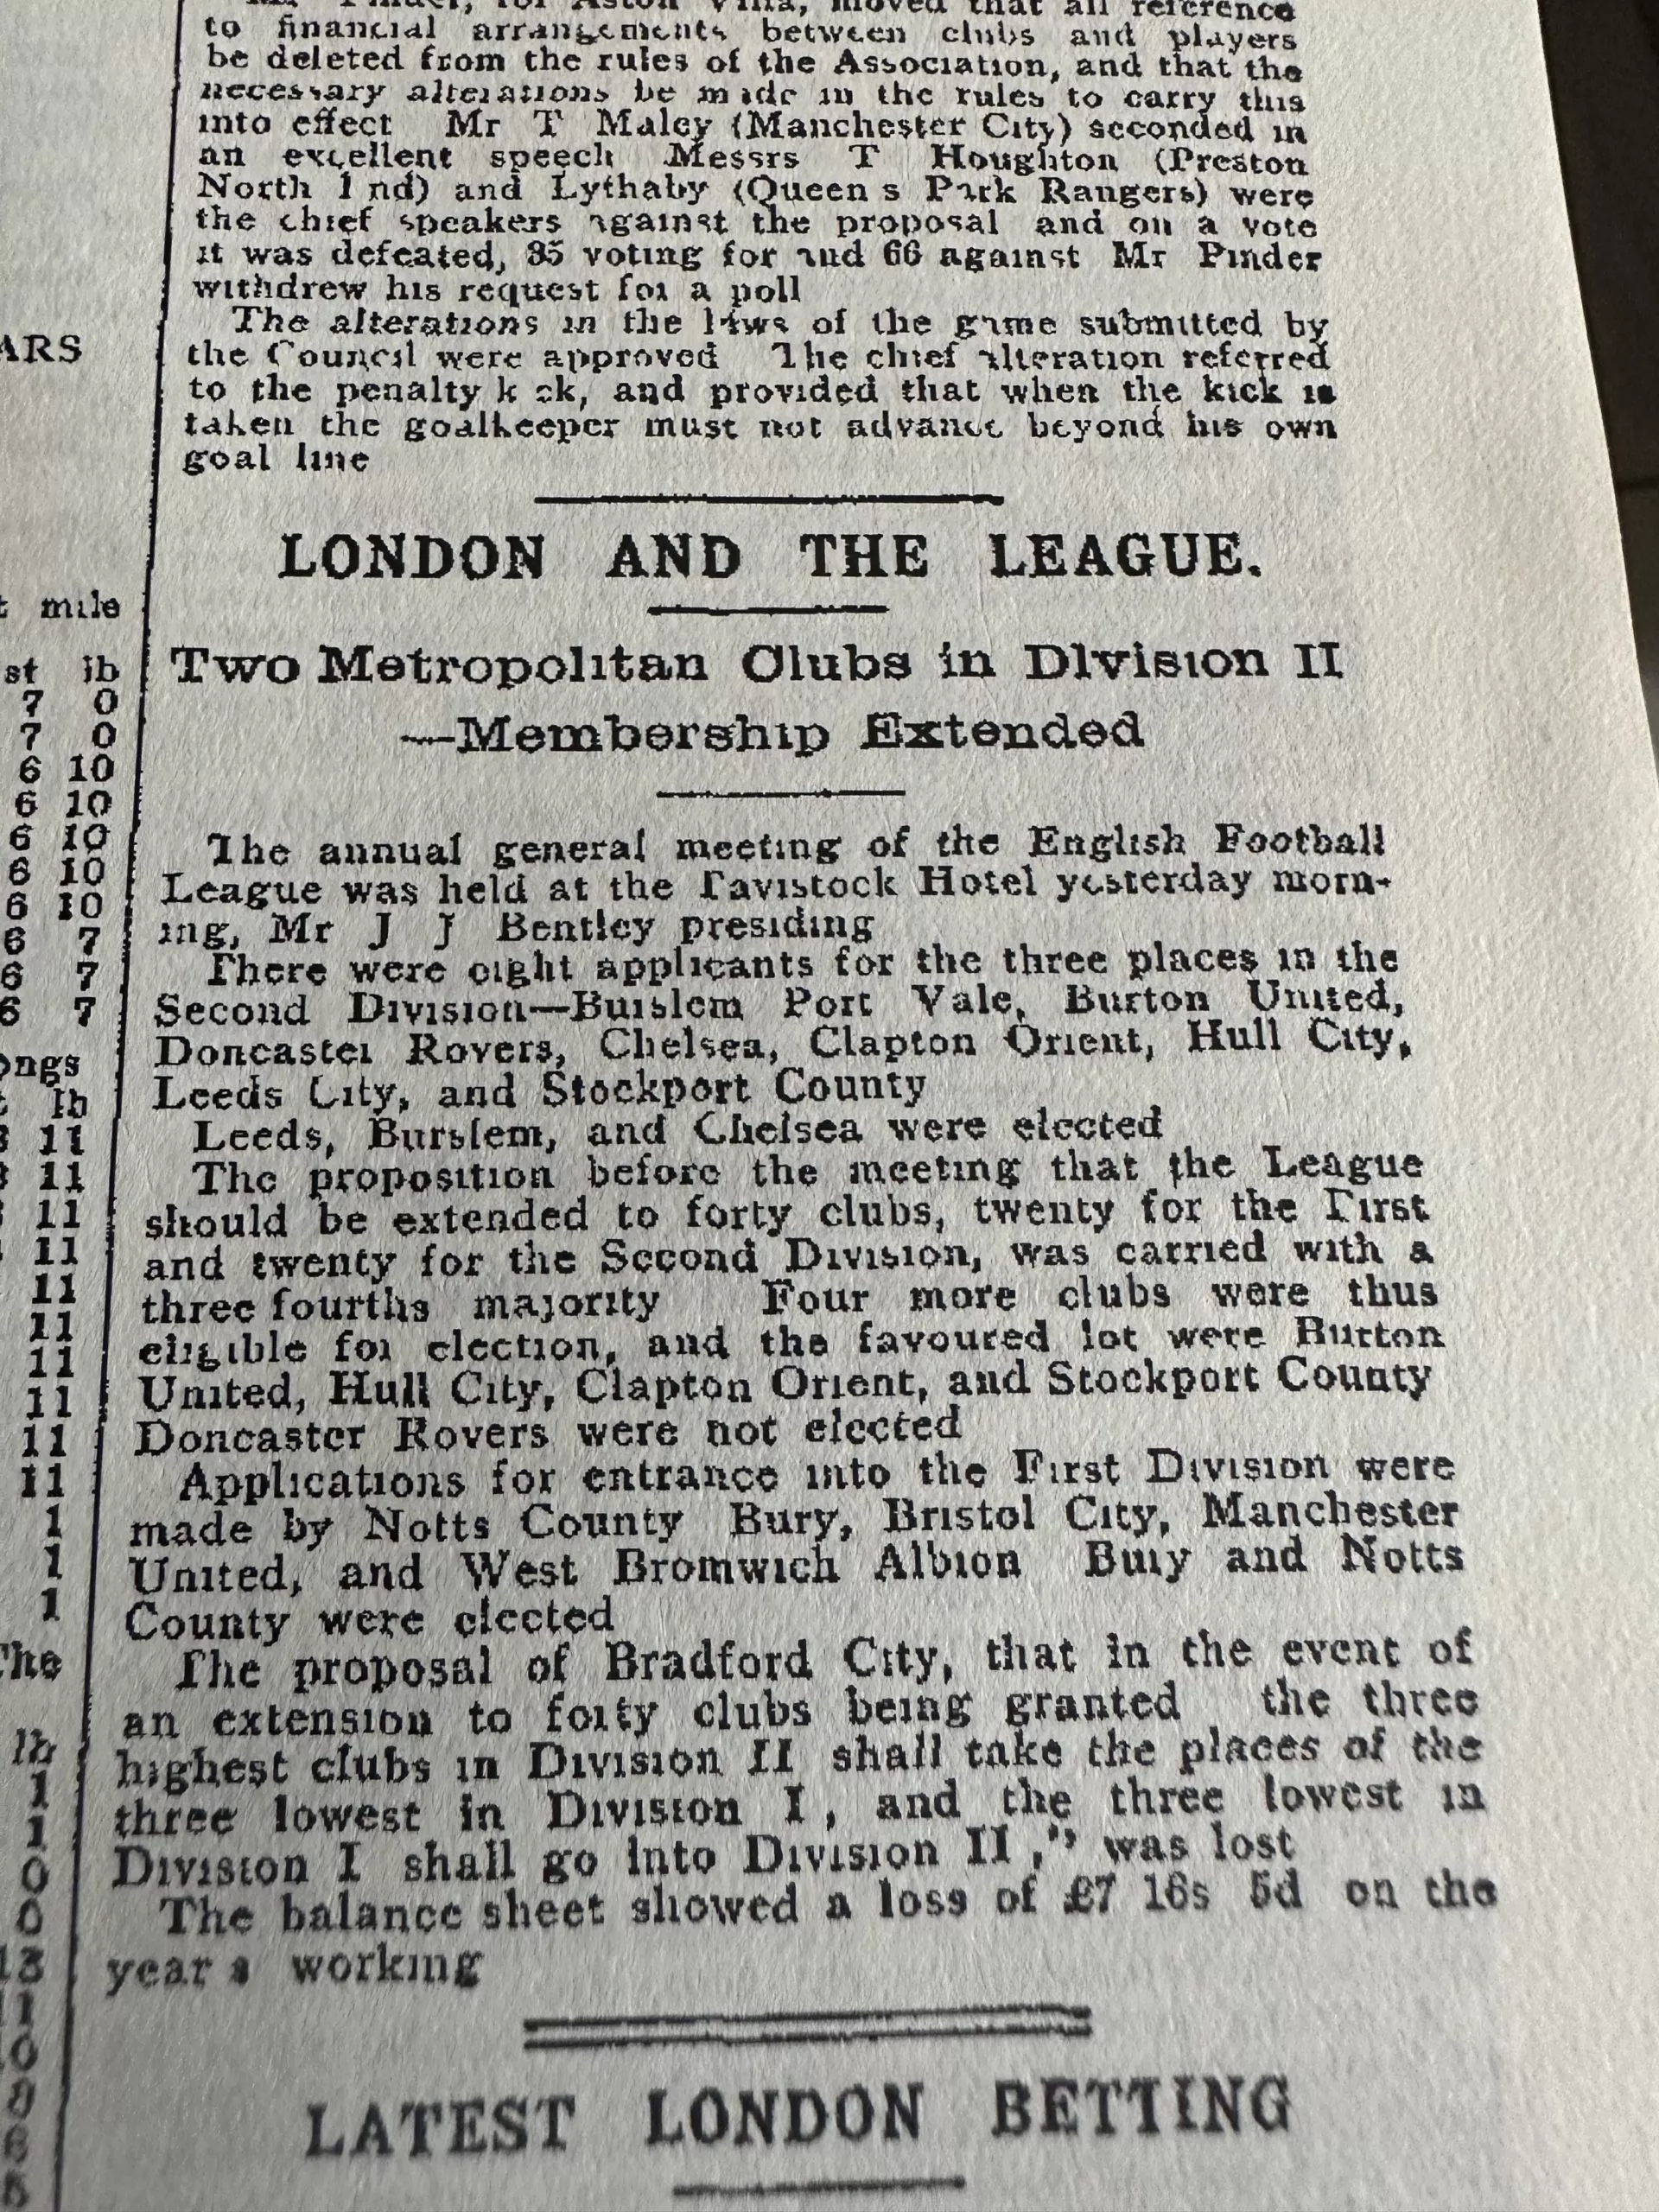 Leeds City was voted to the English Football League's Second Division alongside Port Vale and Chelsea at the annual general meeting in 1905.